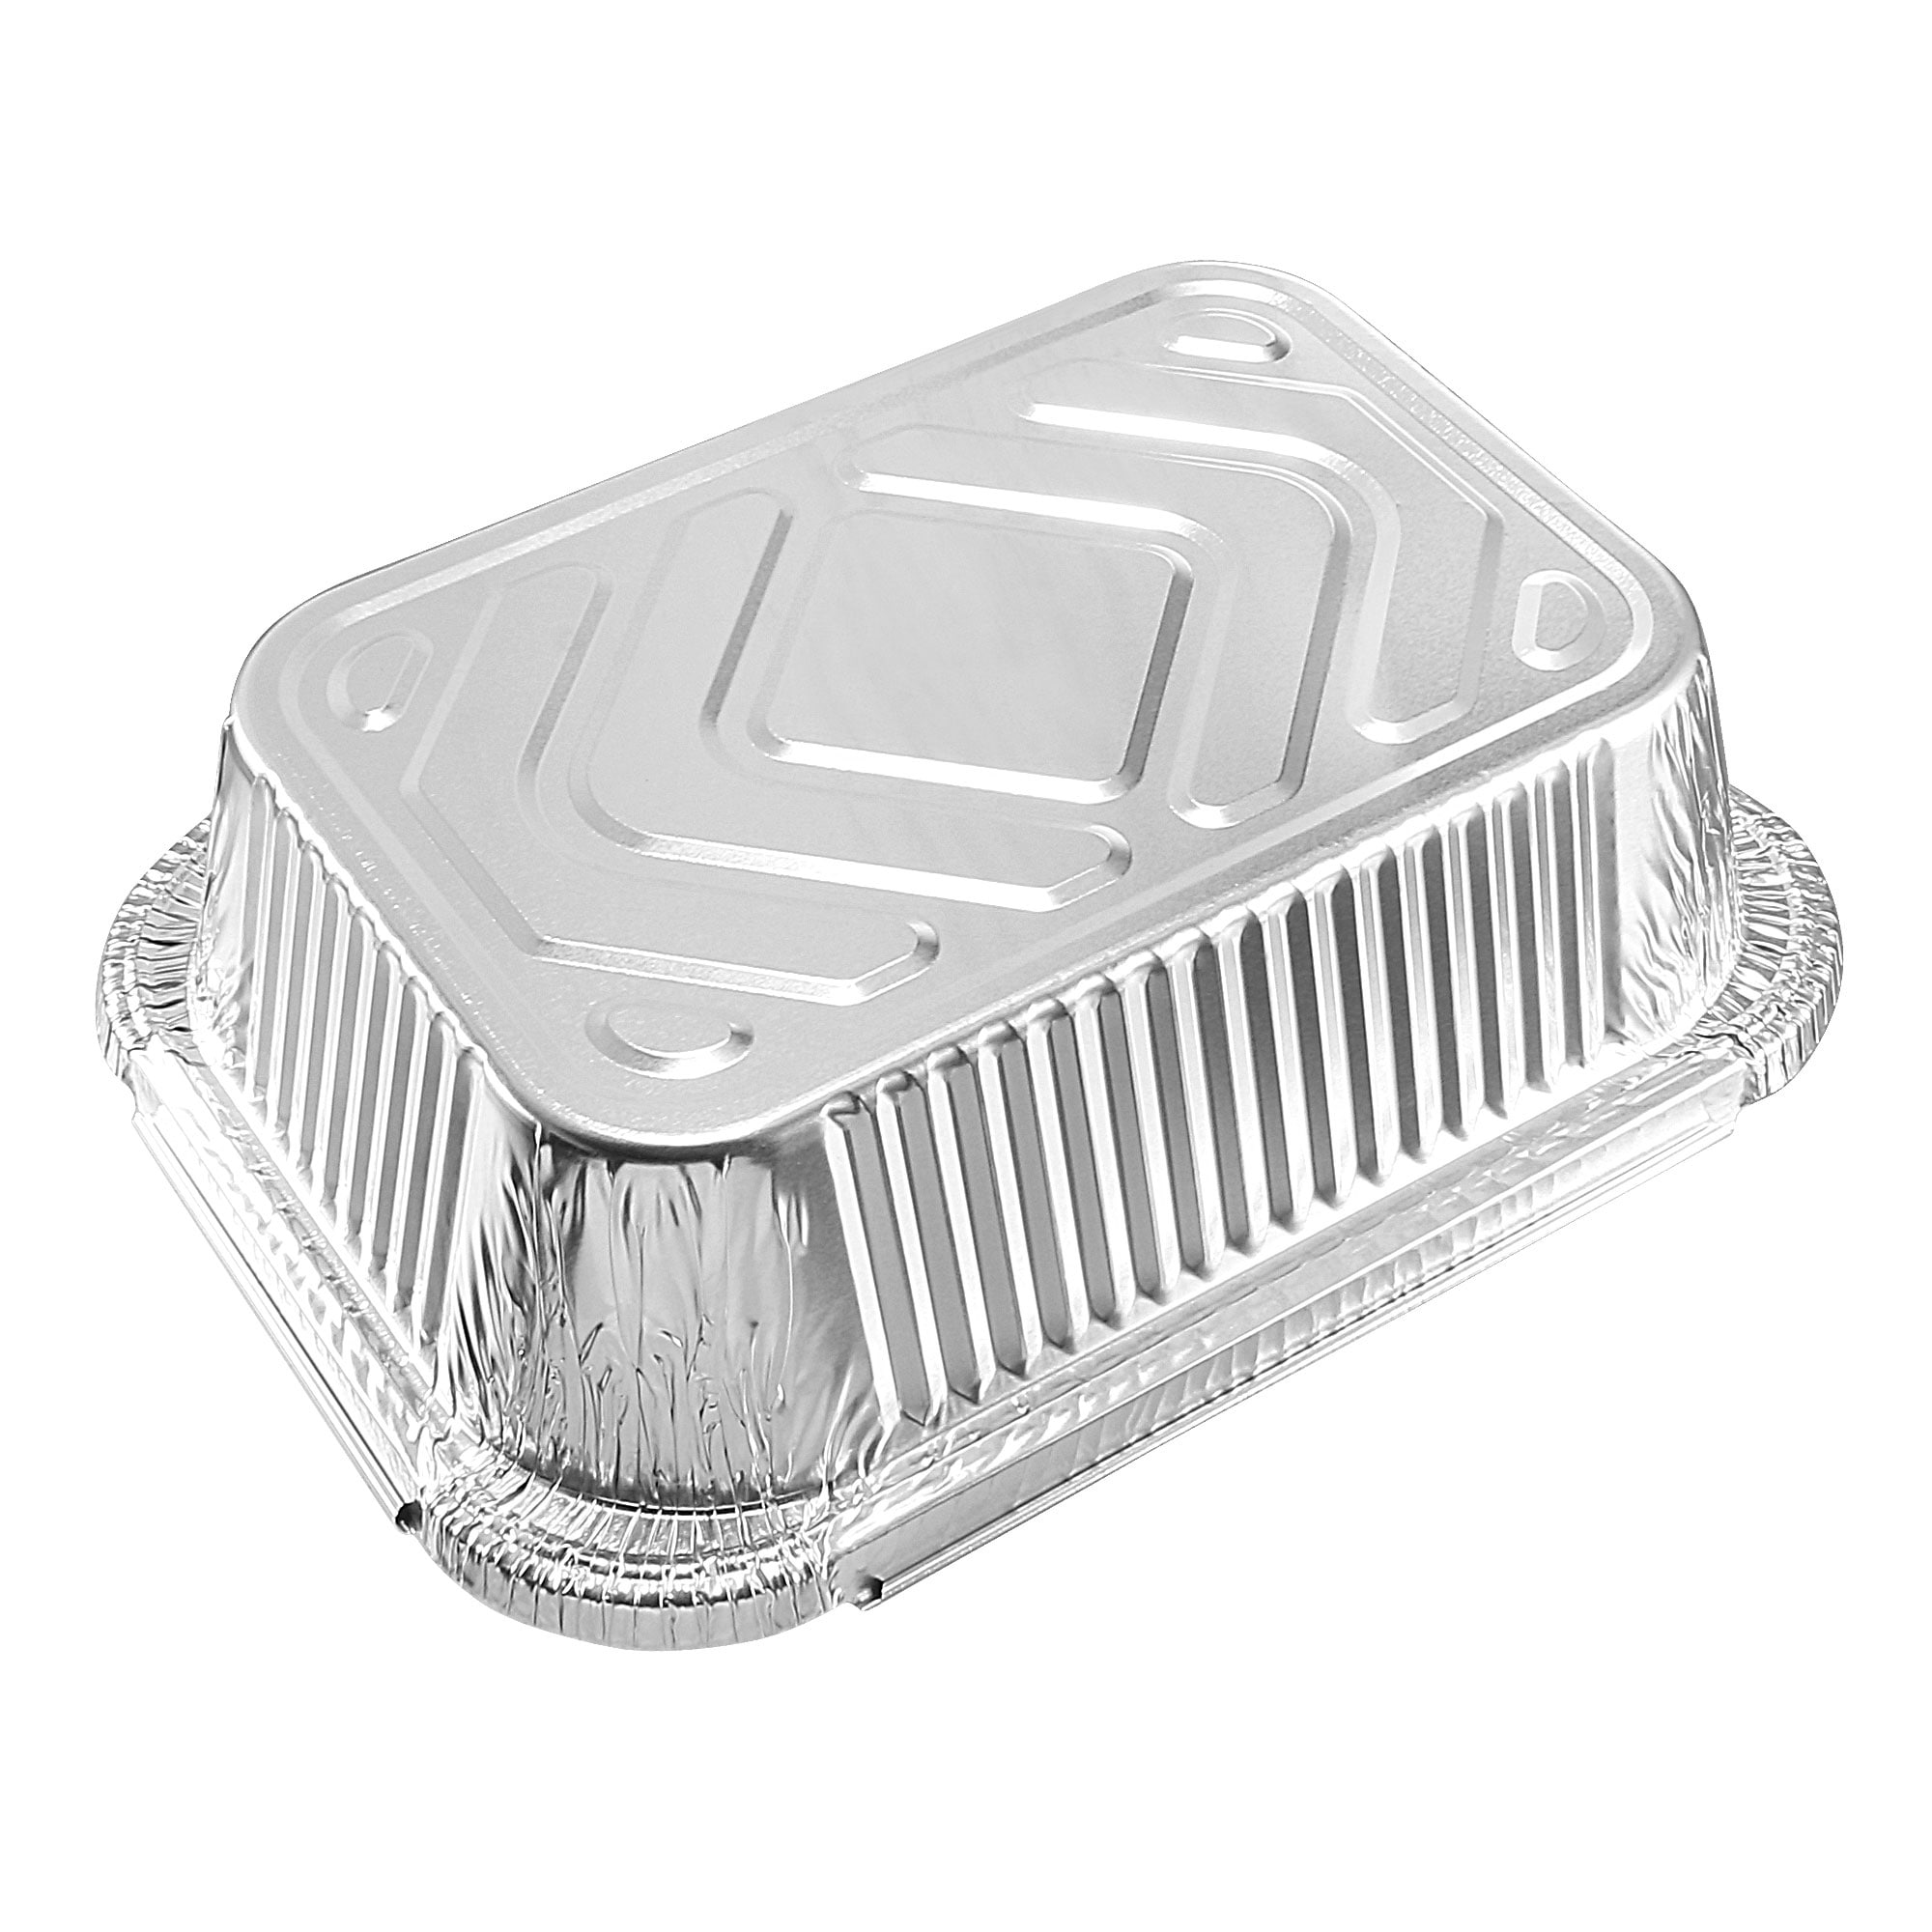 https://ak1.ostkcdn.com/images/products/is/images/direct/84b5f1dd75dc325e2dfa37b07603b63da21b4f19/7%22-x-5%22-Aluminum-Foil-Pans%2C-30oz-Disposable-Trays-Containers-100pcs.jpg